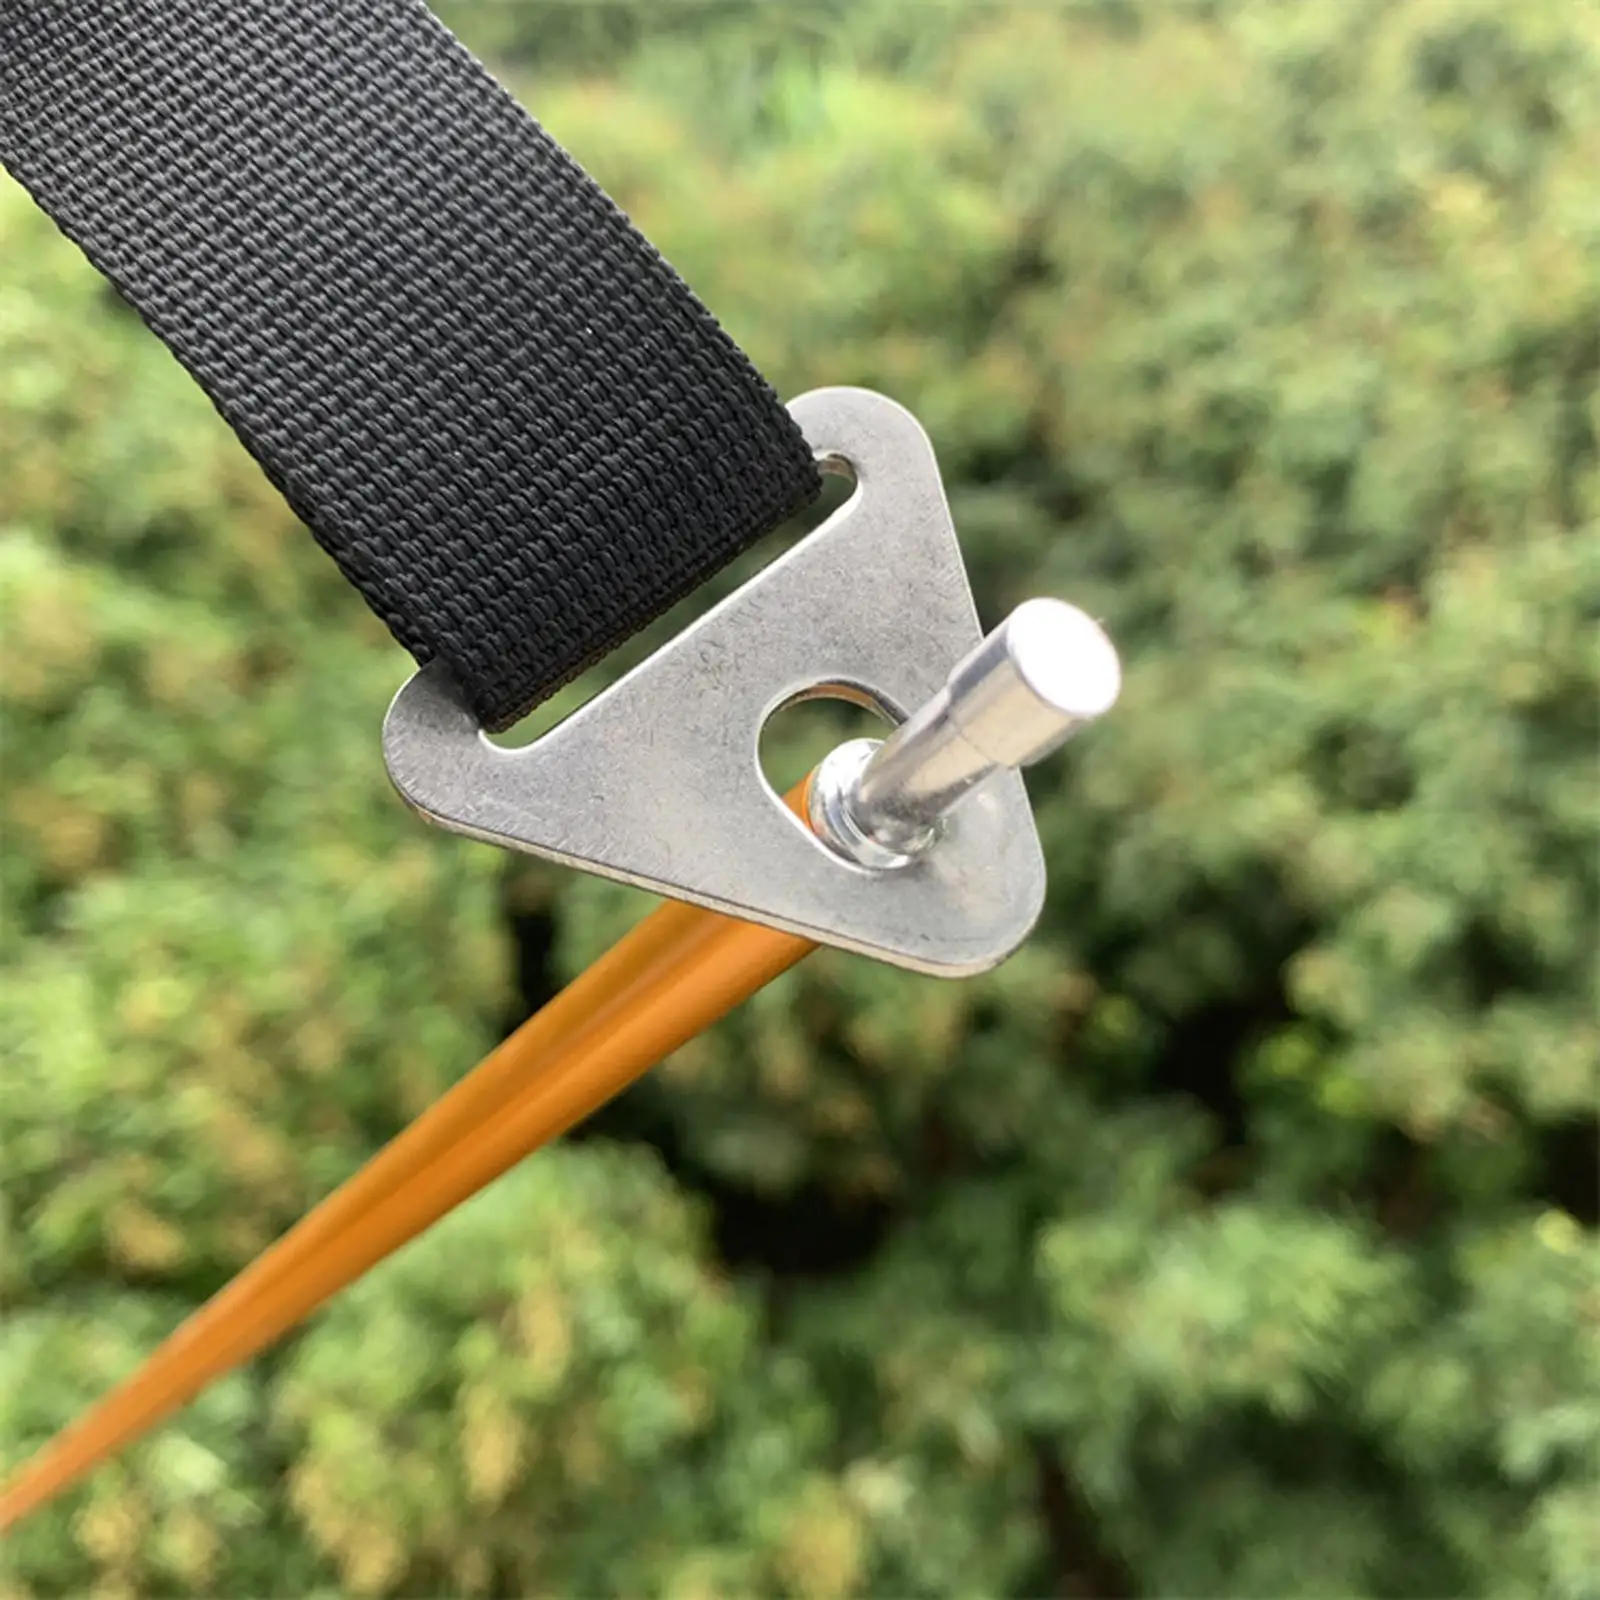 Cord Adjuster Tent Tensioner, Sturdy Pull Button Fastener Triangle Buckle Hook Tightener Wind Buckle for Canopy Picnic Shelter